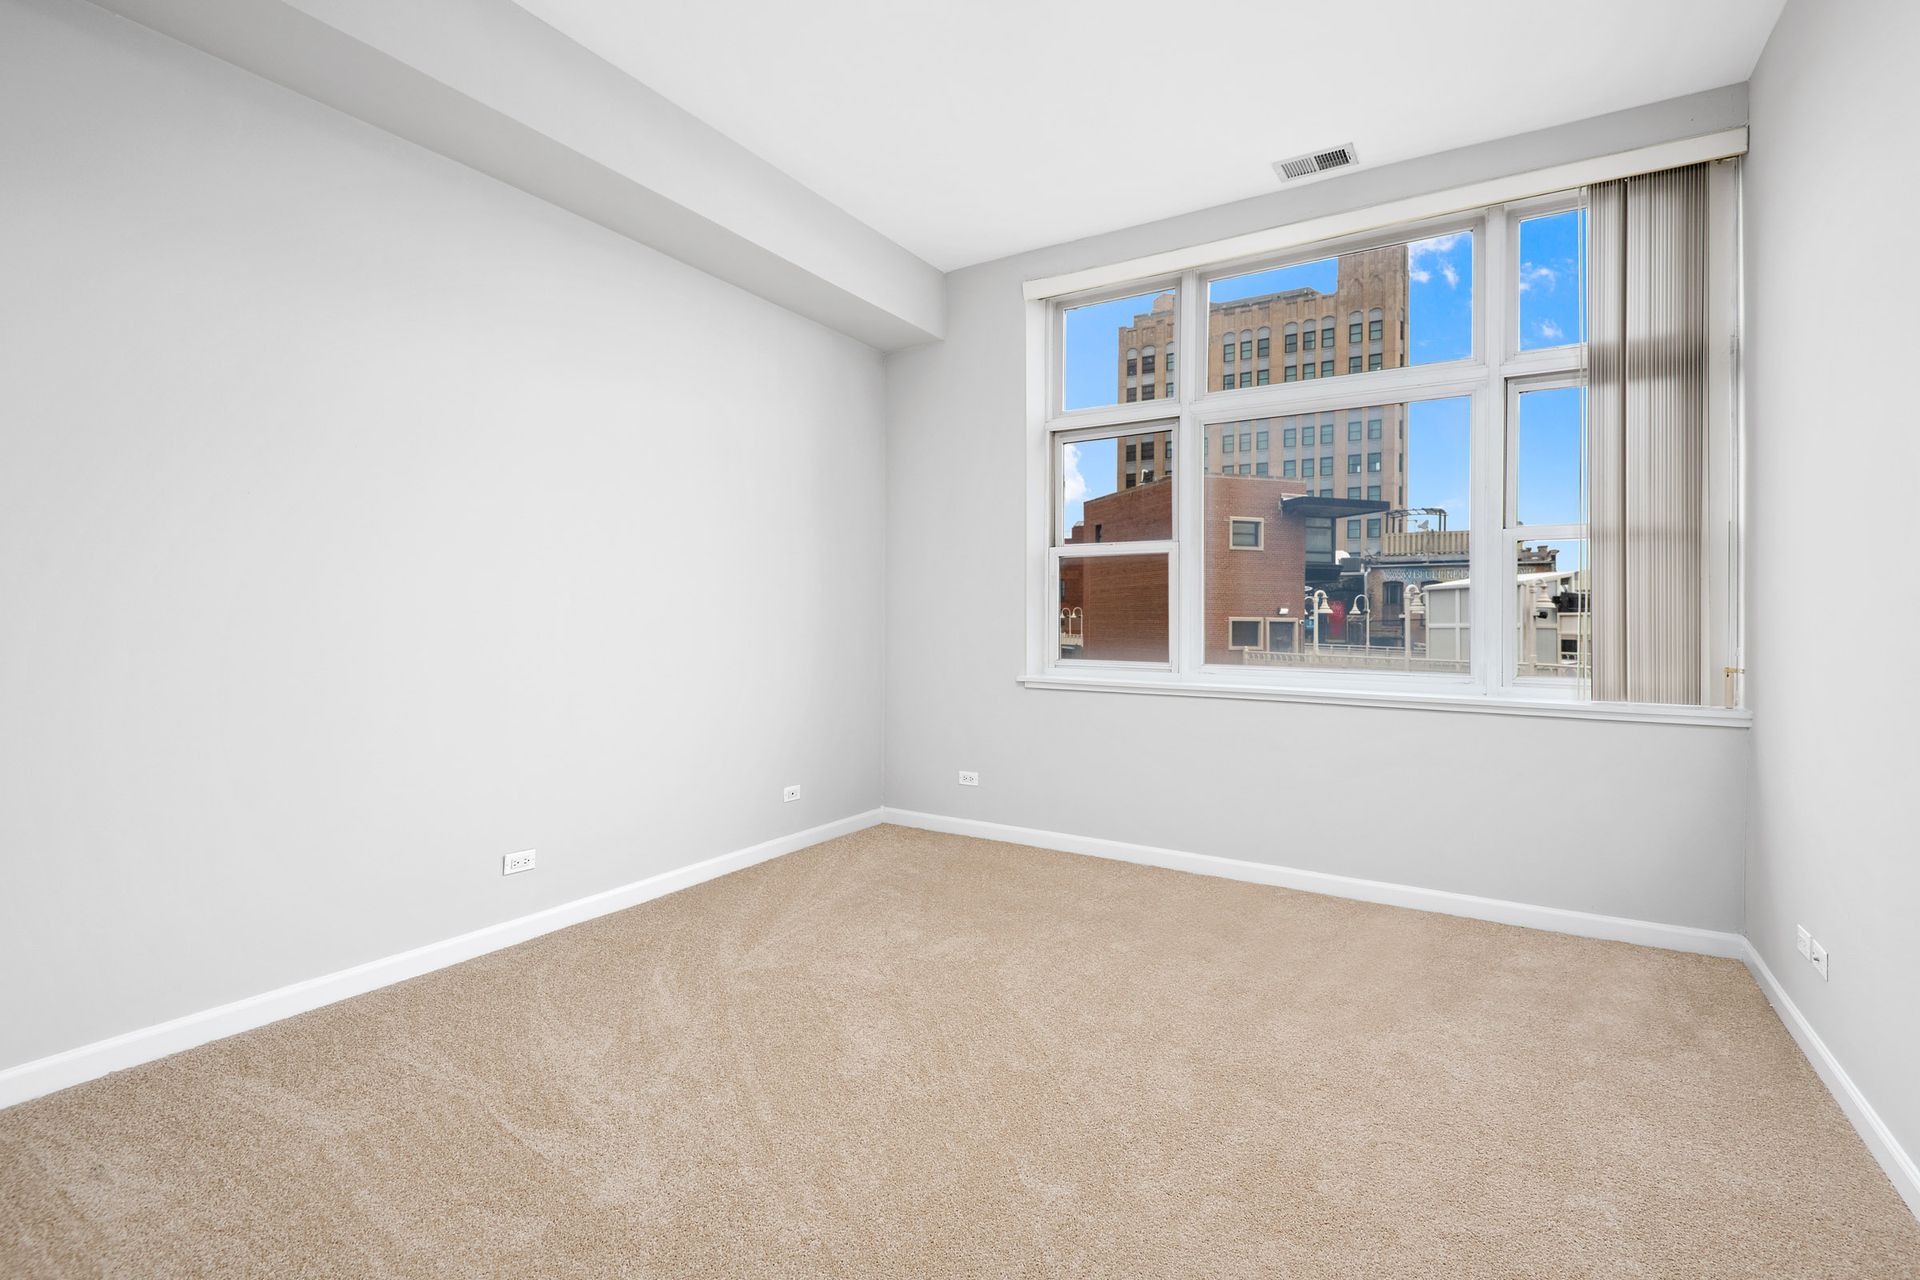 An empty room with a large window and a carpeted floor at 2010 West Pierce Avenue.